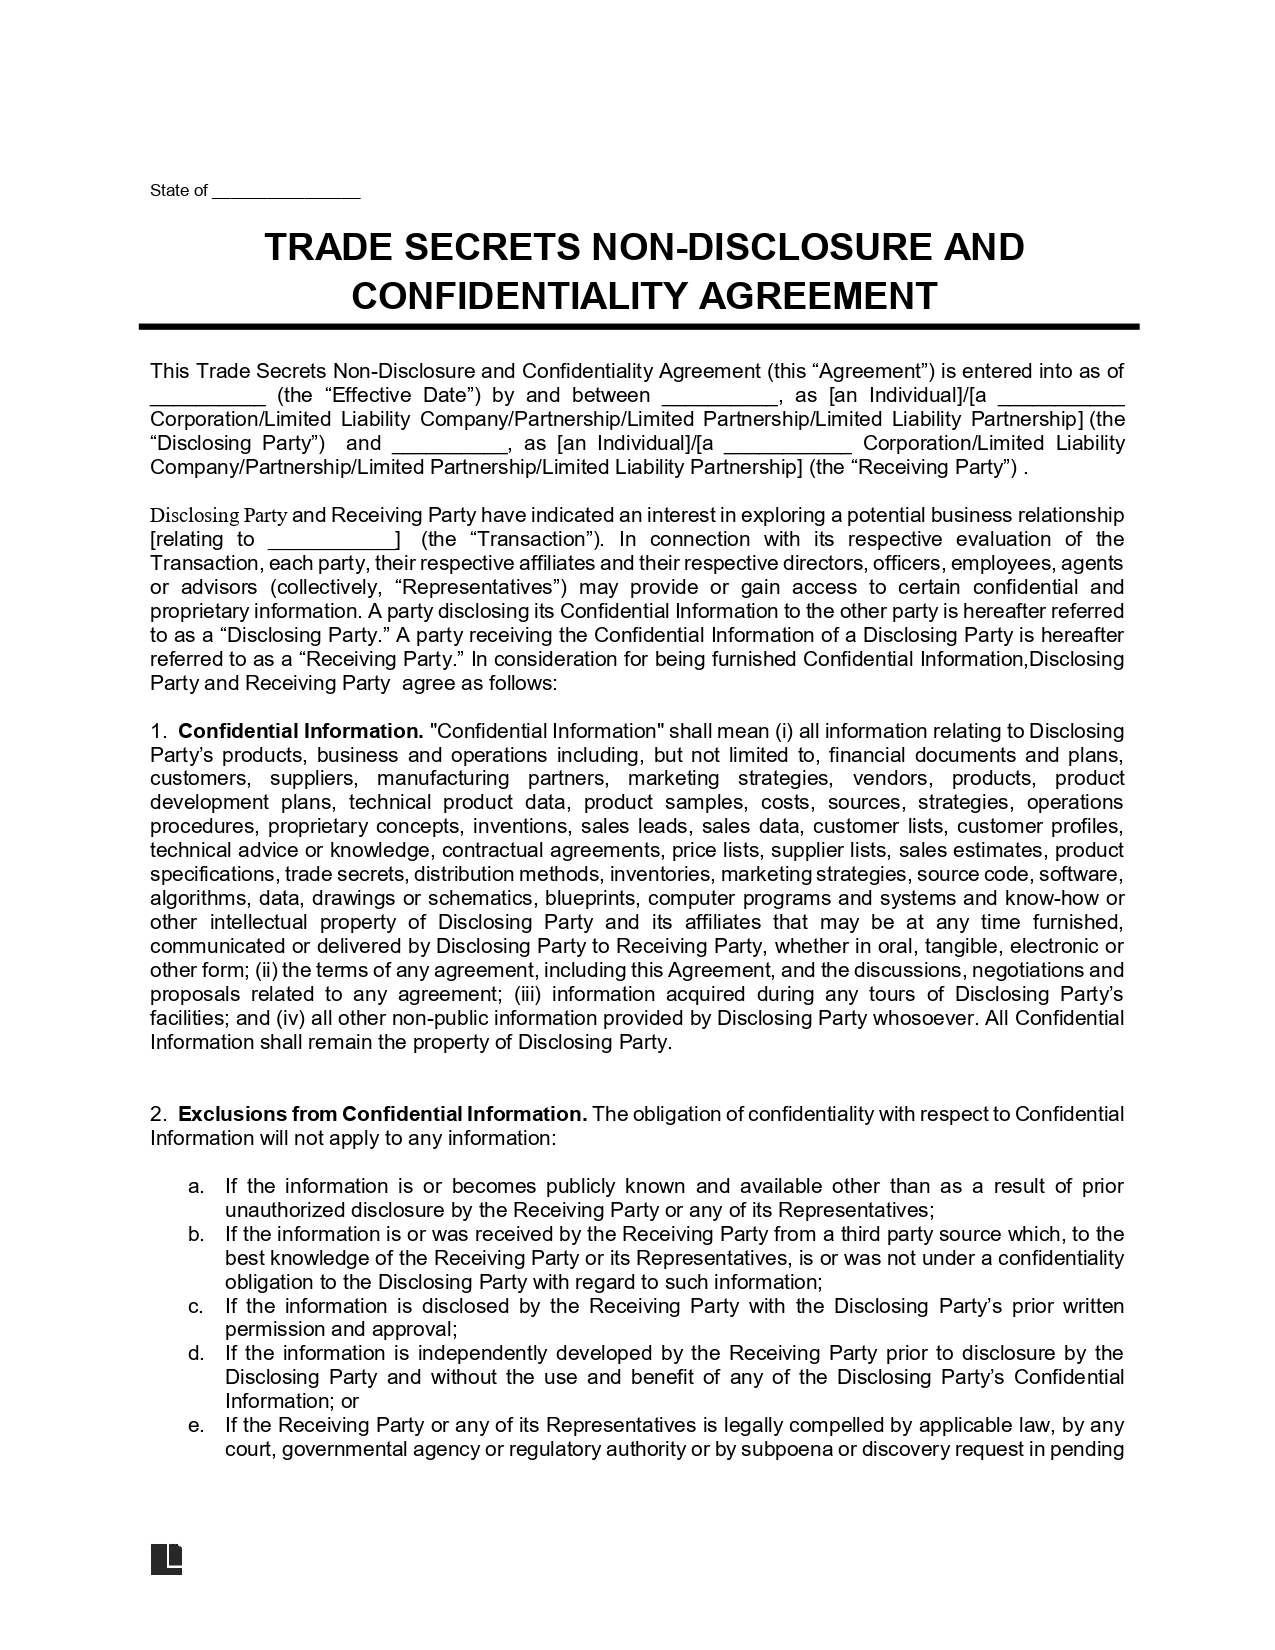 Trade Secrets Non Disclosure and Confidentiality Agreement